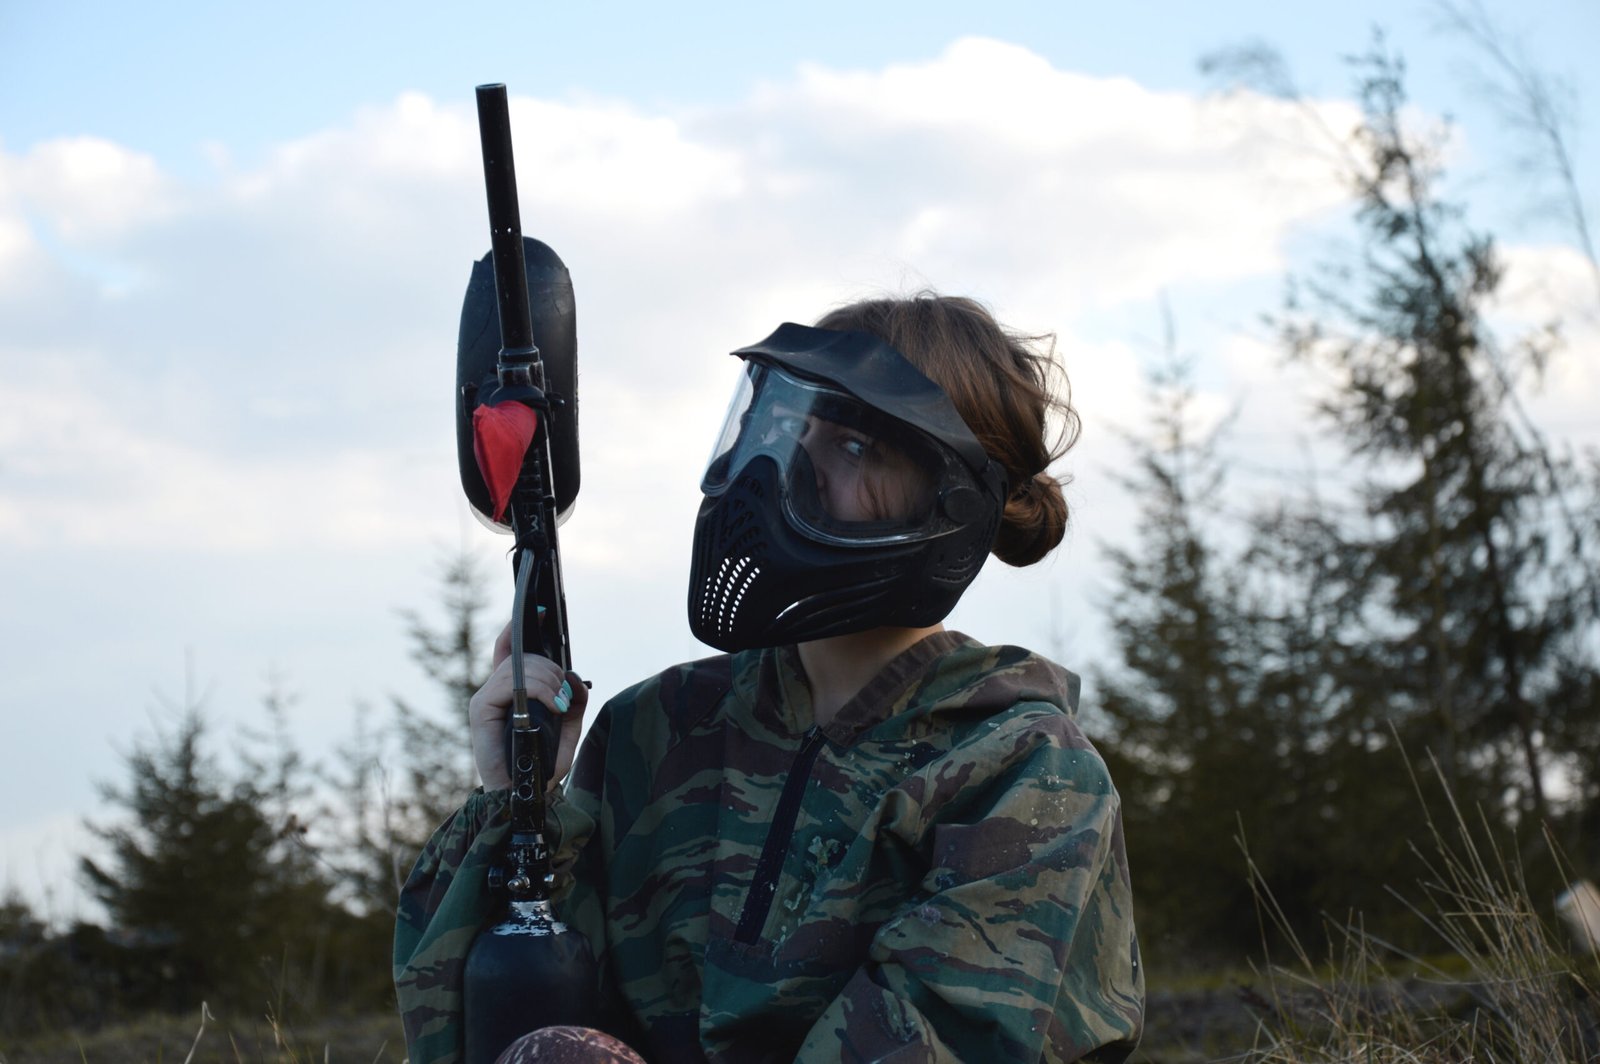 Paintball sport player girl in protective camouflage uniform and mask with marker gun outdoors